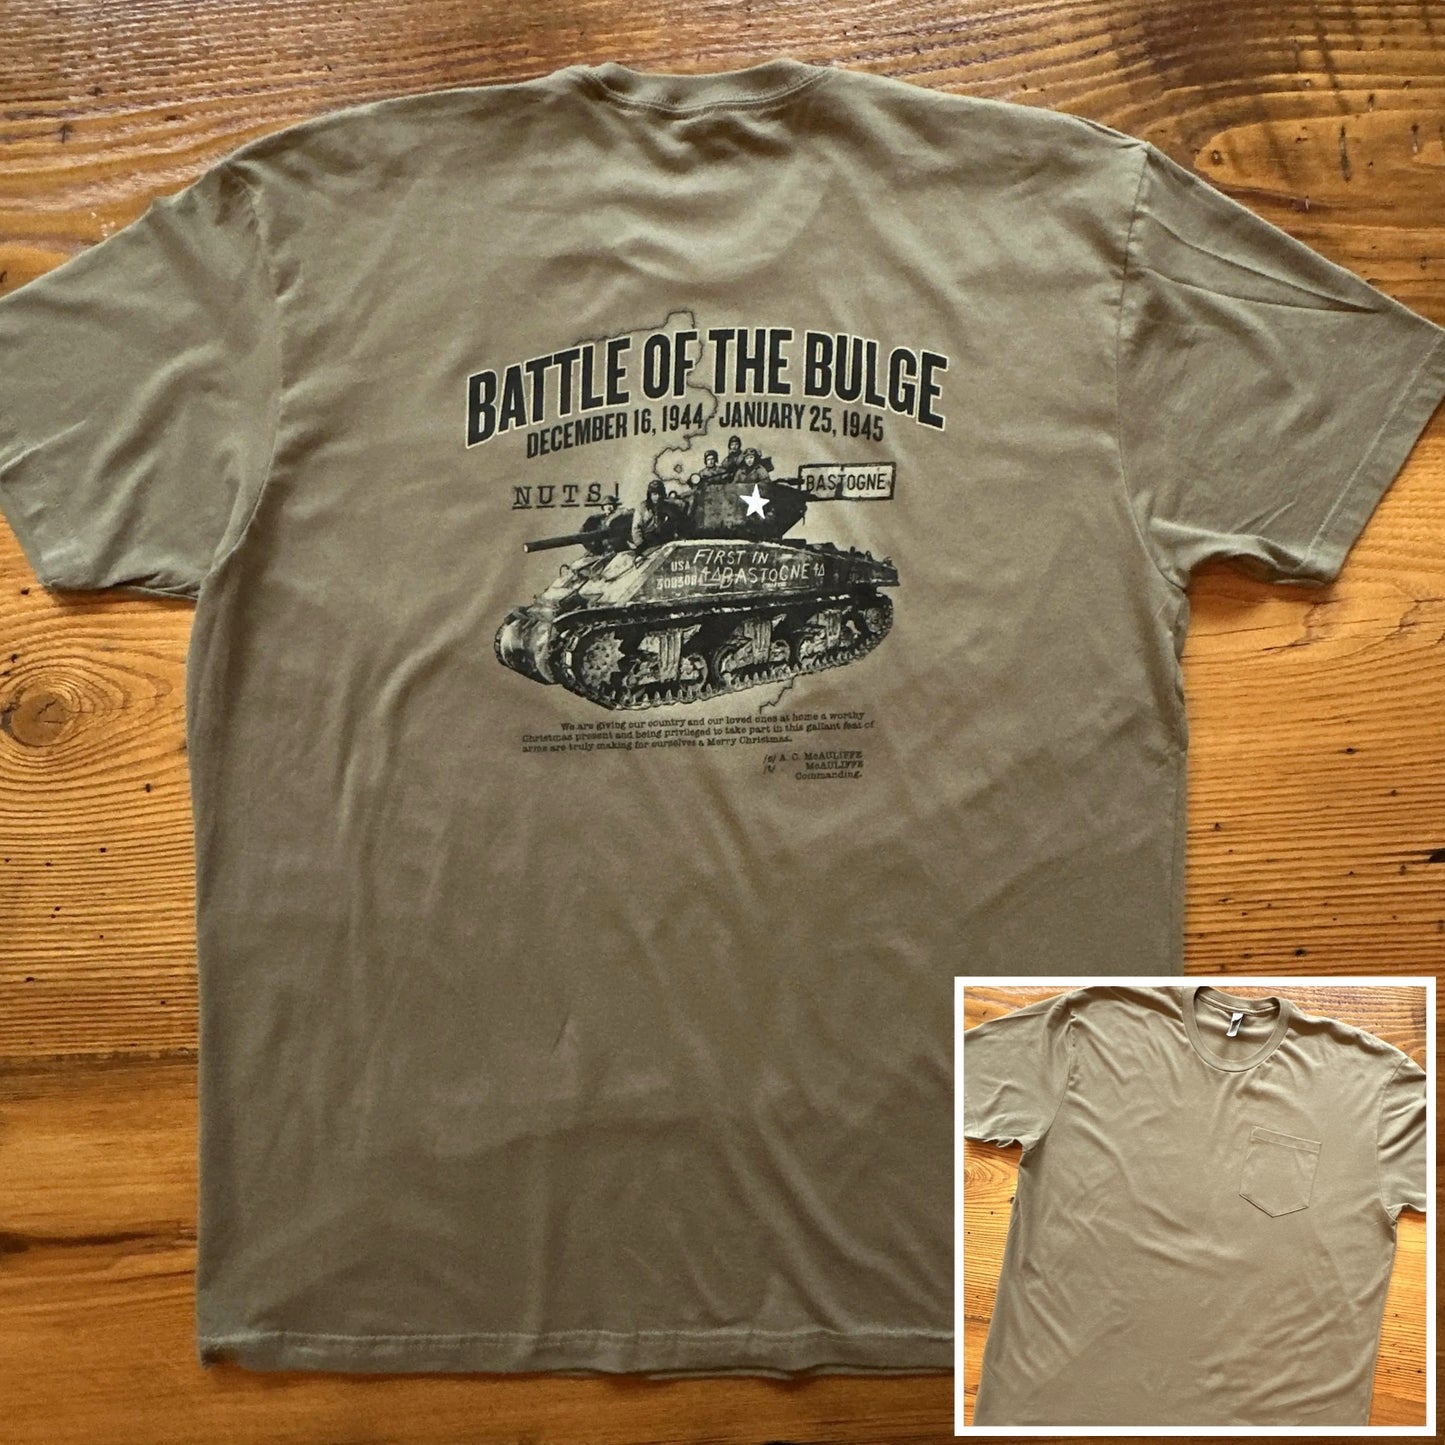 The Battle of the Bulge Pocket  T-shirt — Only available in 2XL